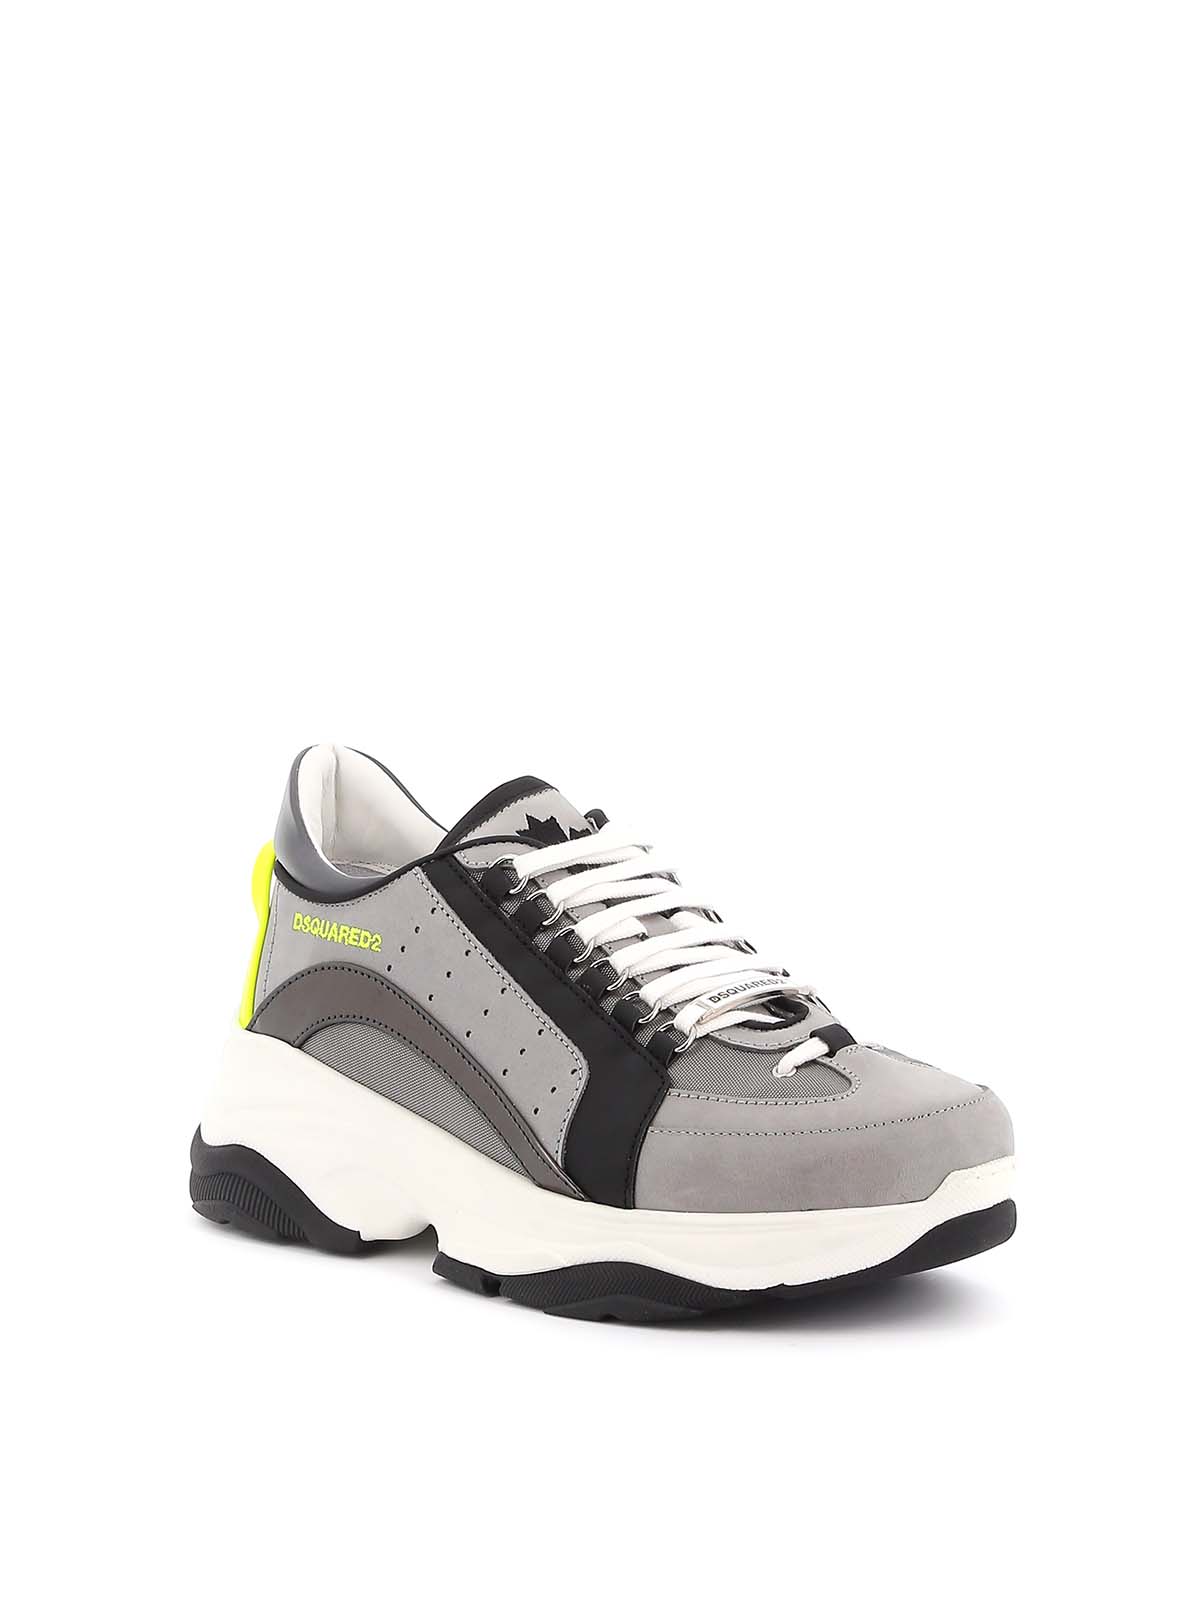 Dsquared2 - Bumpy 551 grey sneakers 